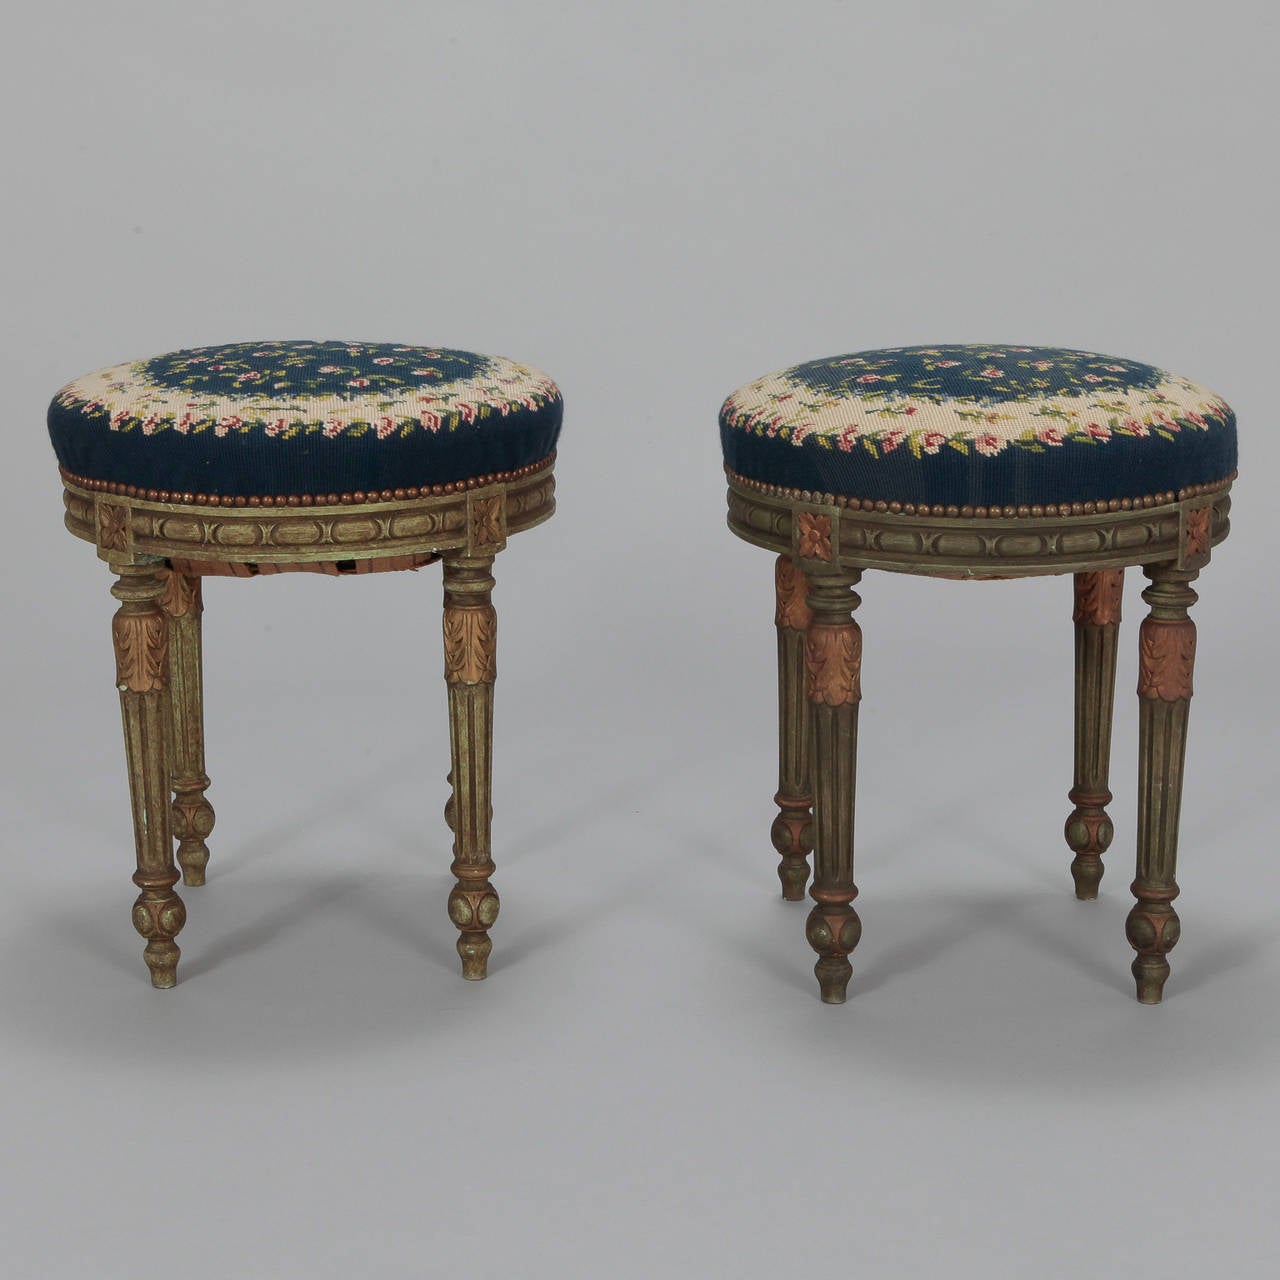 Pair of round French stools with reeded and tapered legs with green painted finish, circa 1920s. Covered in blue and cream needlepoint floral fabric. Sold and priced as a pair.